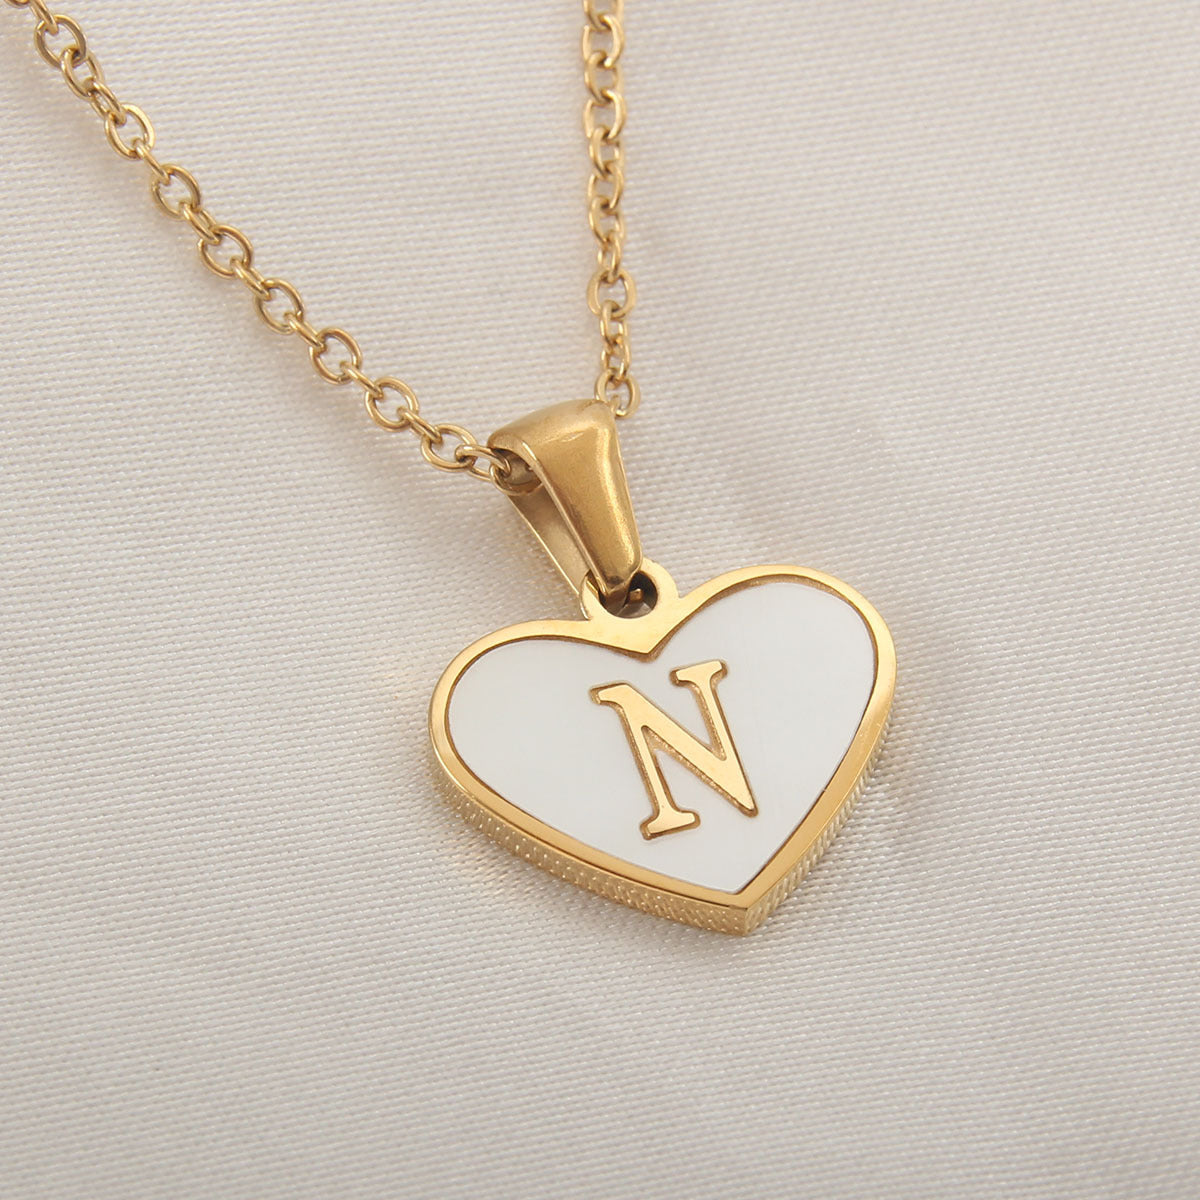 26 Letter Heart-shaped Necklace White Shell Love Clavicle Chain Fashion Personalized Necklace